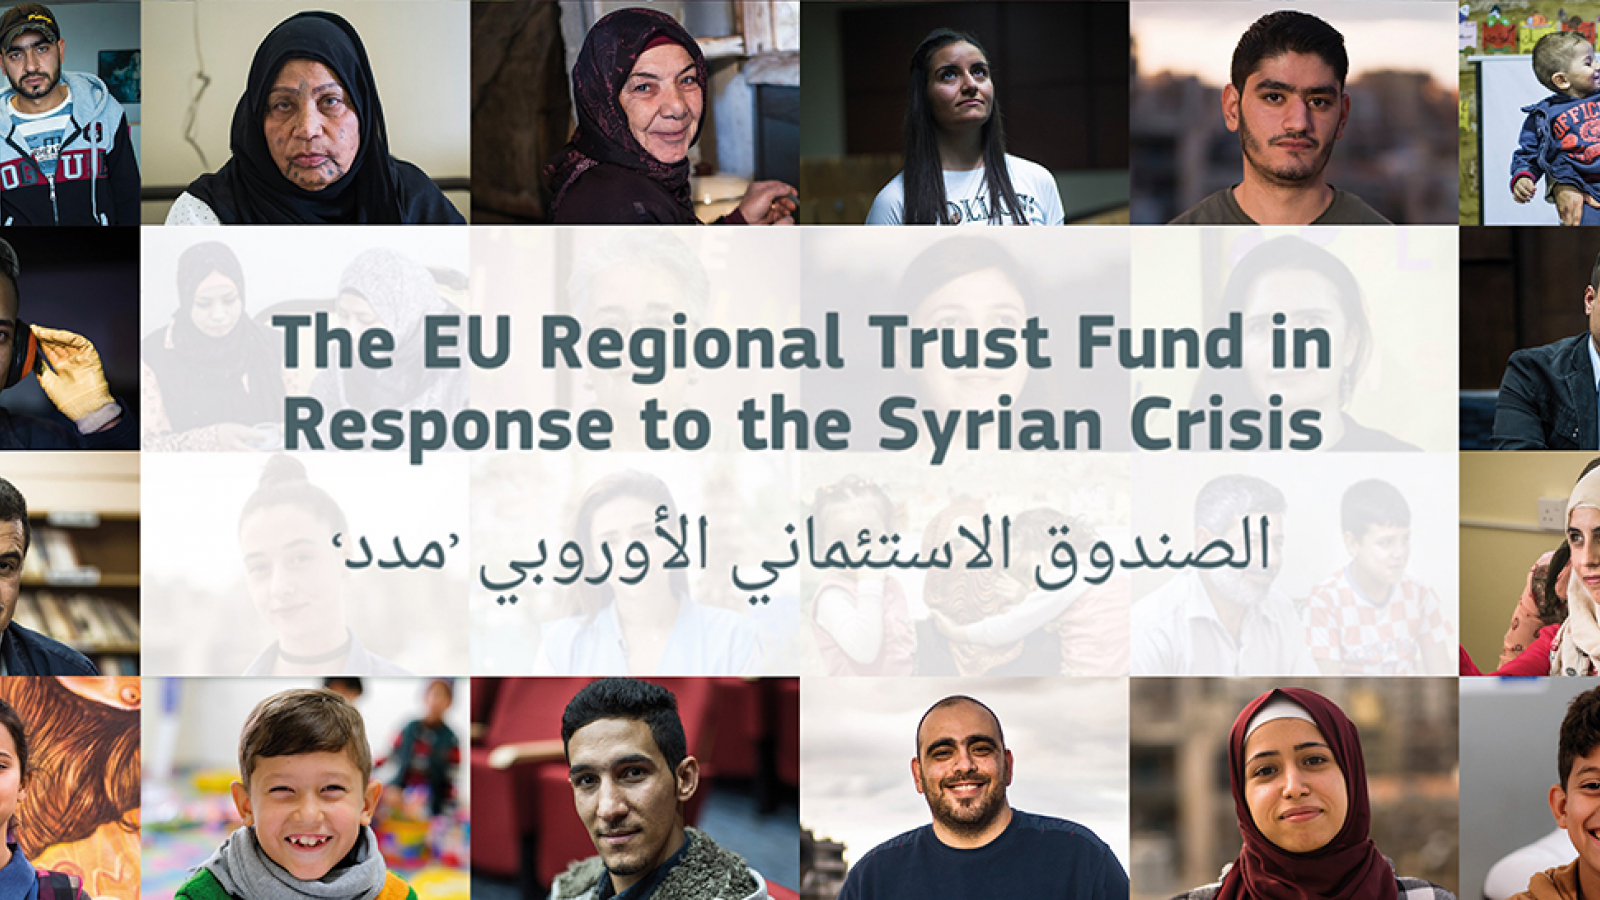 ©EU Regional Trust Fund in Response to the Syrian Crisis